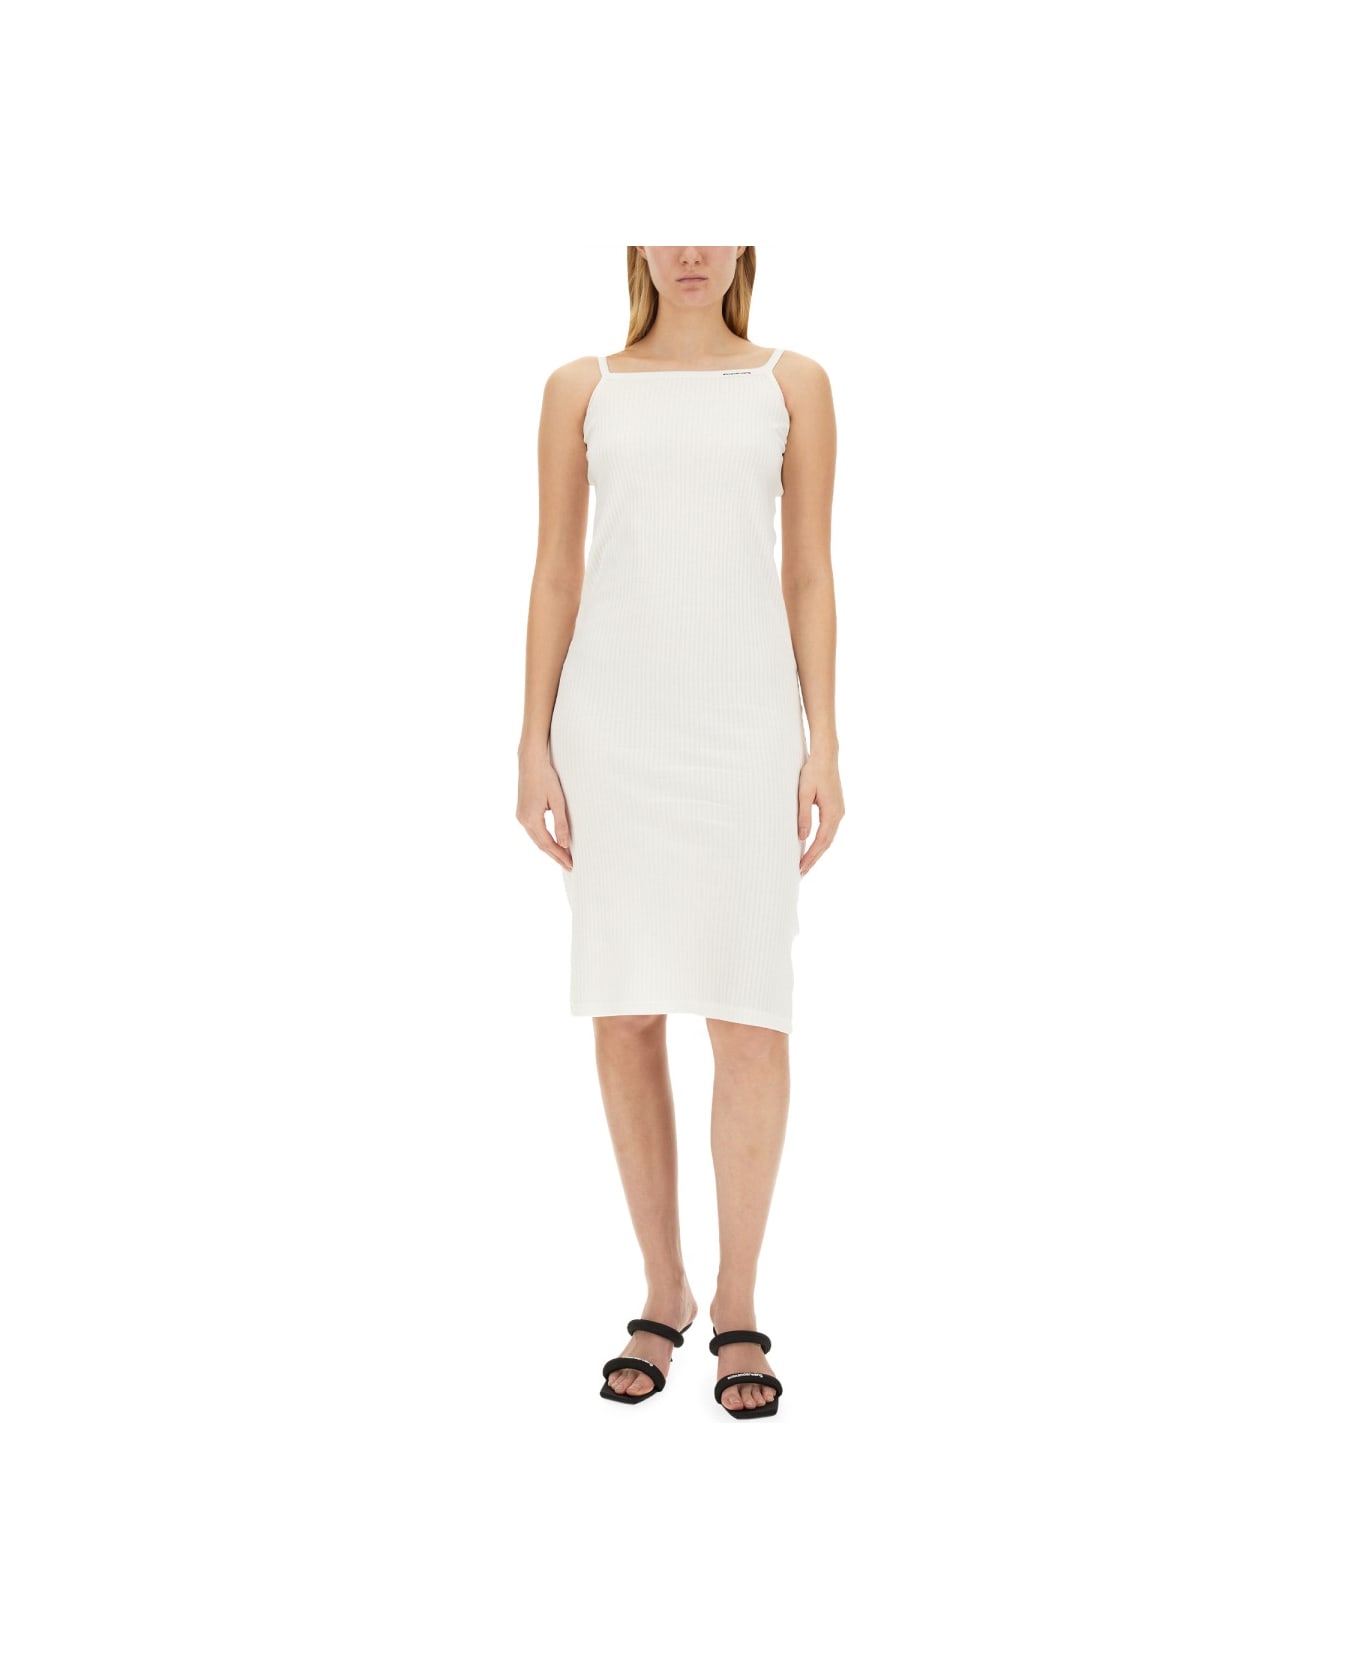 T by Alexander Wang Skinny Fit Dress - WHITE